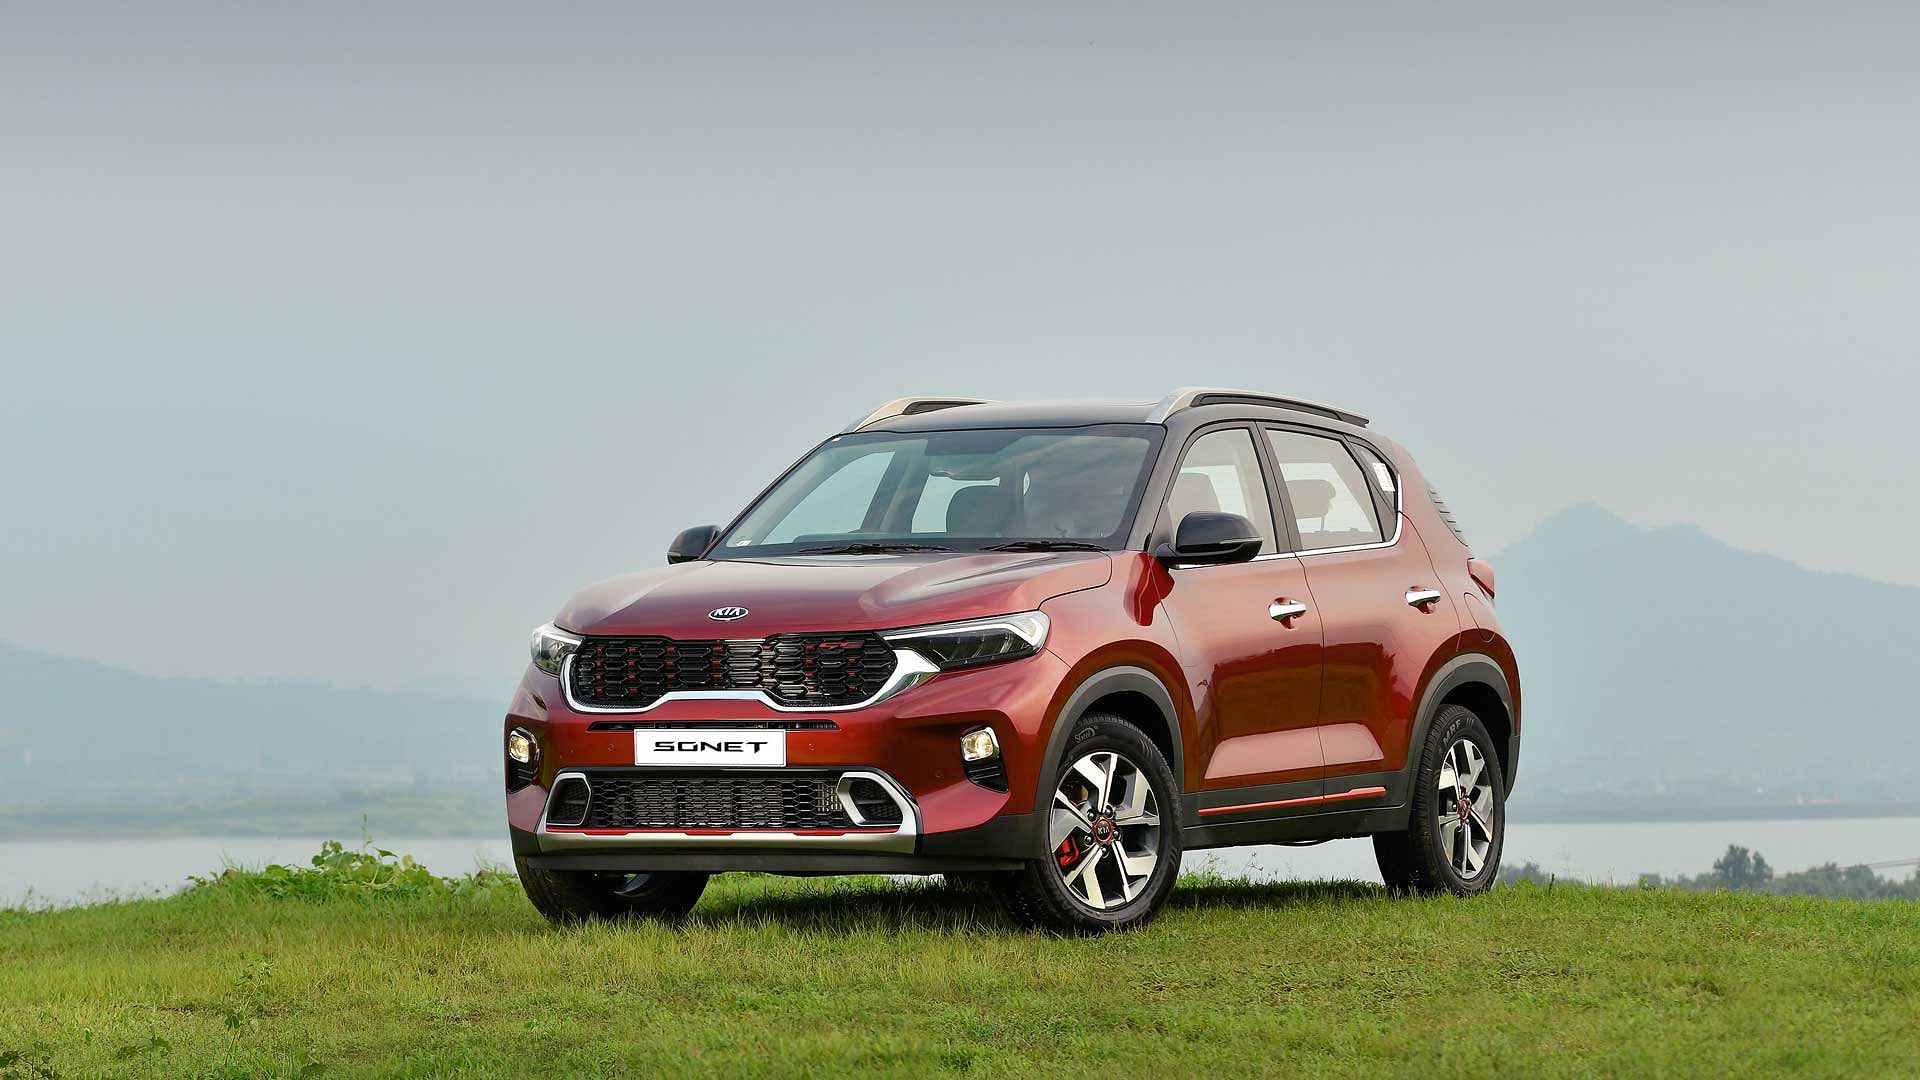 The Kia Sonet has been launched in India.